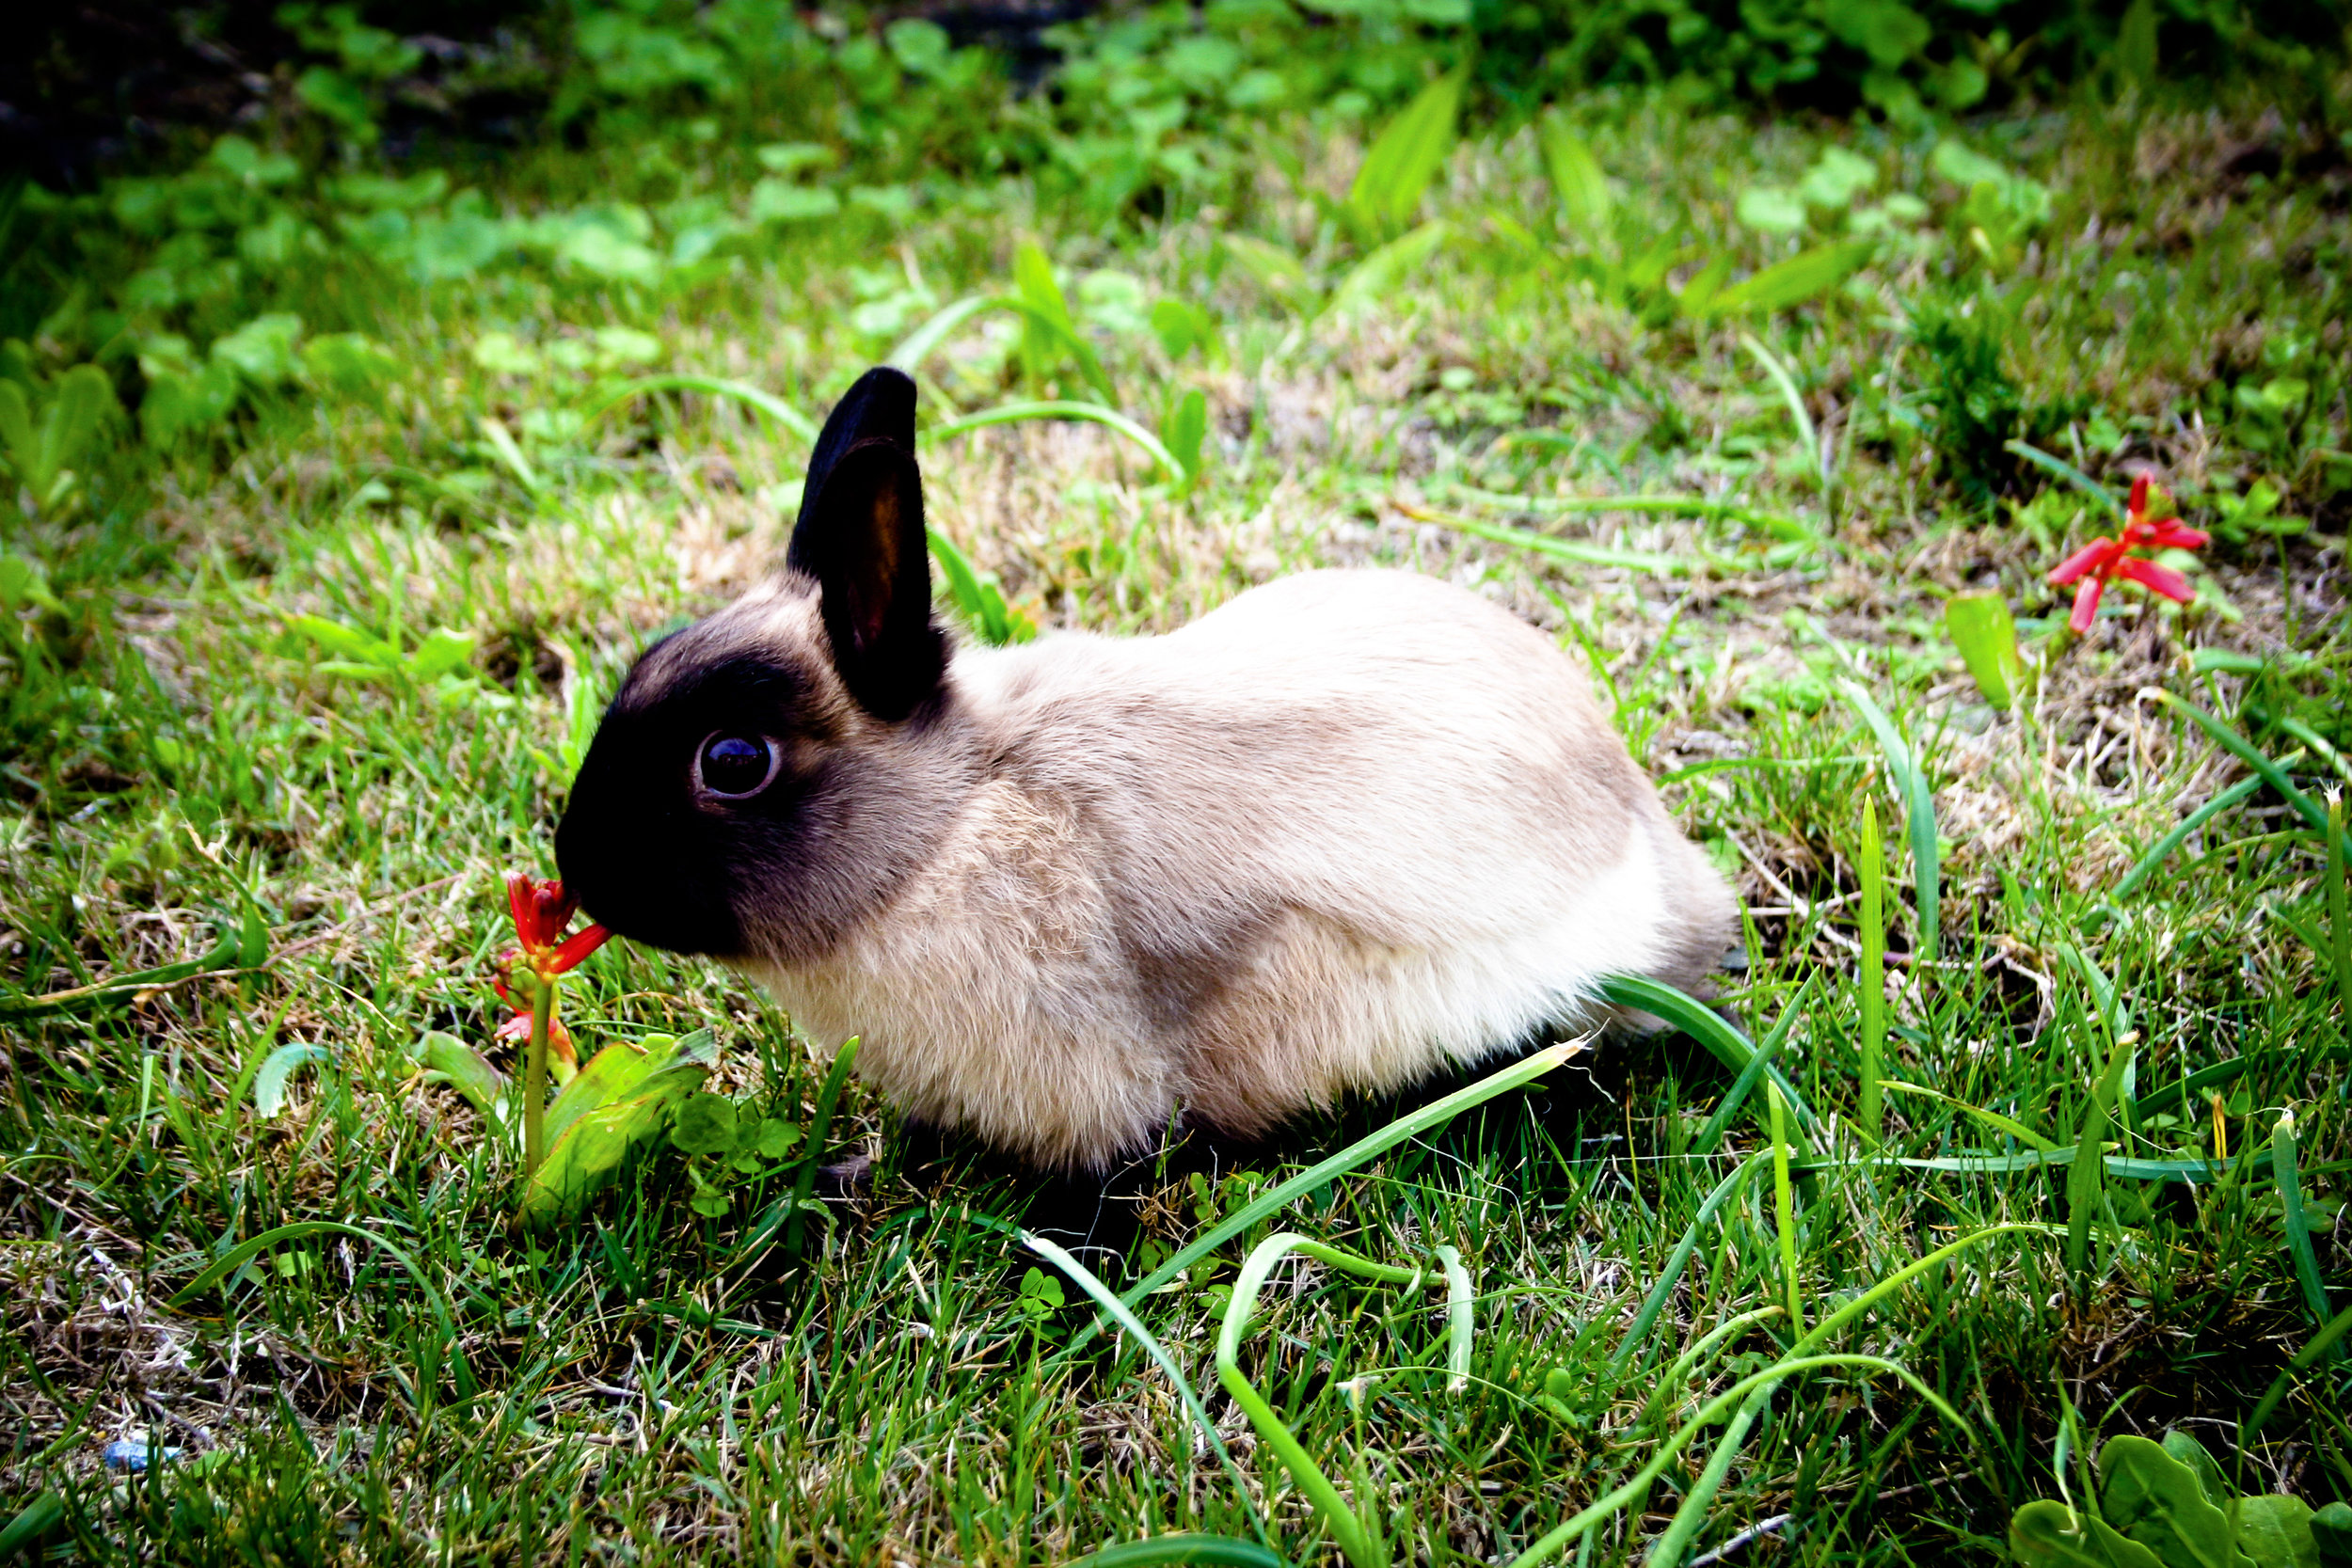 Bunny Stops to Smell the Flowers on an Outdoor Jaunt